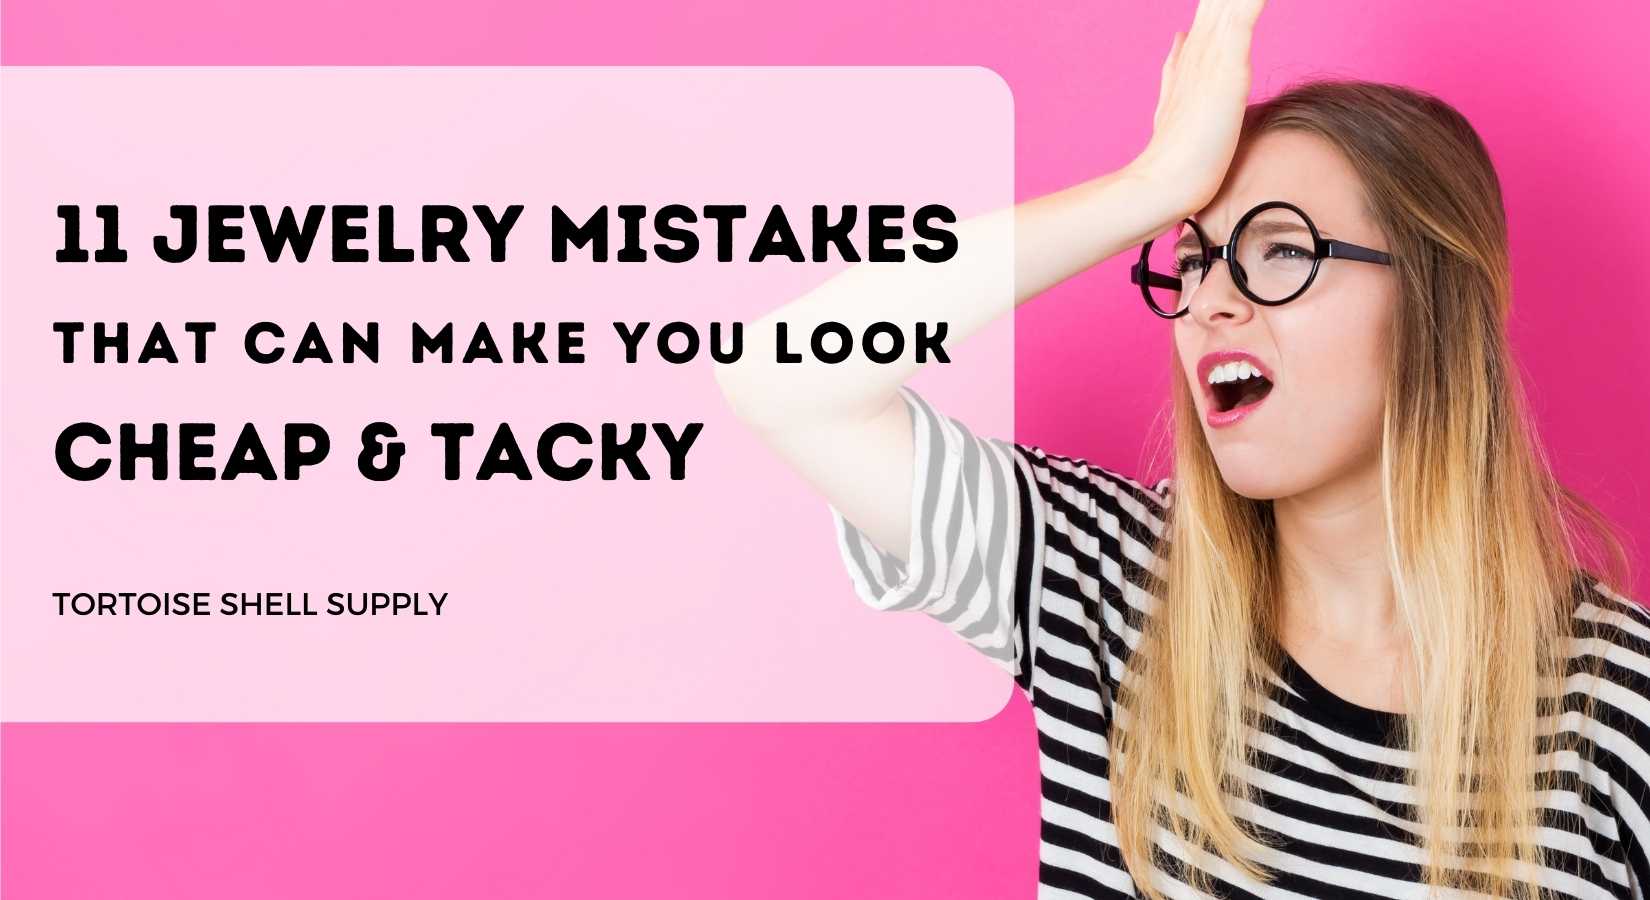 11 Jewelry Mistakes That Make You Look Cheap and Tacky